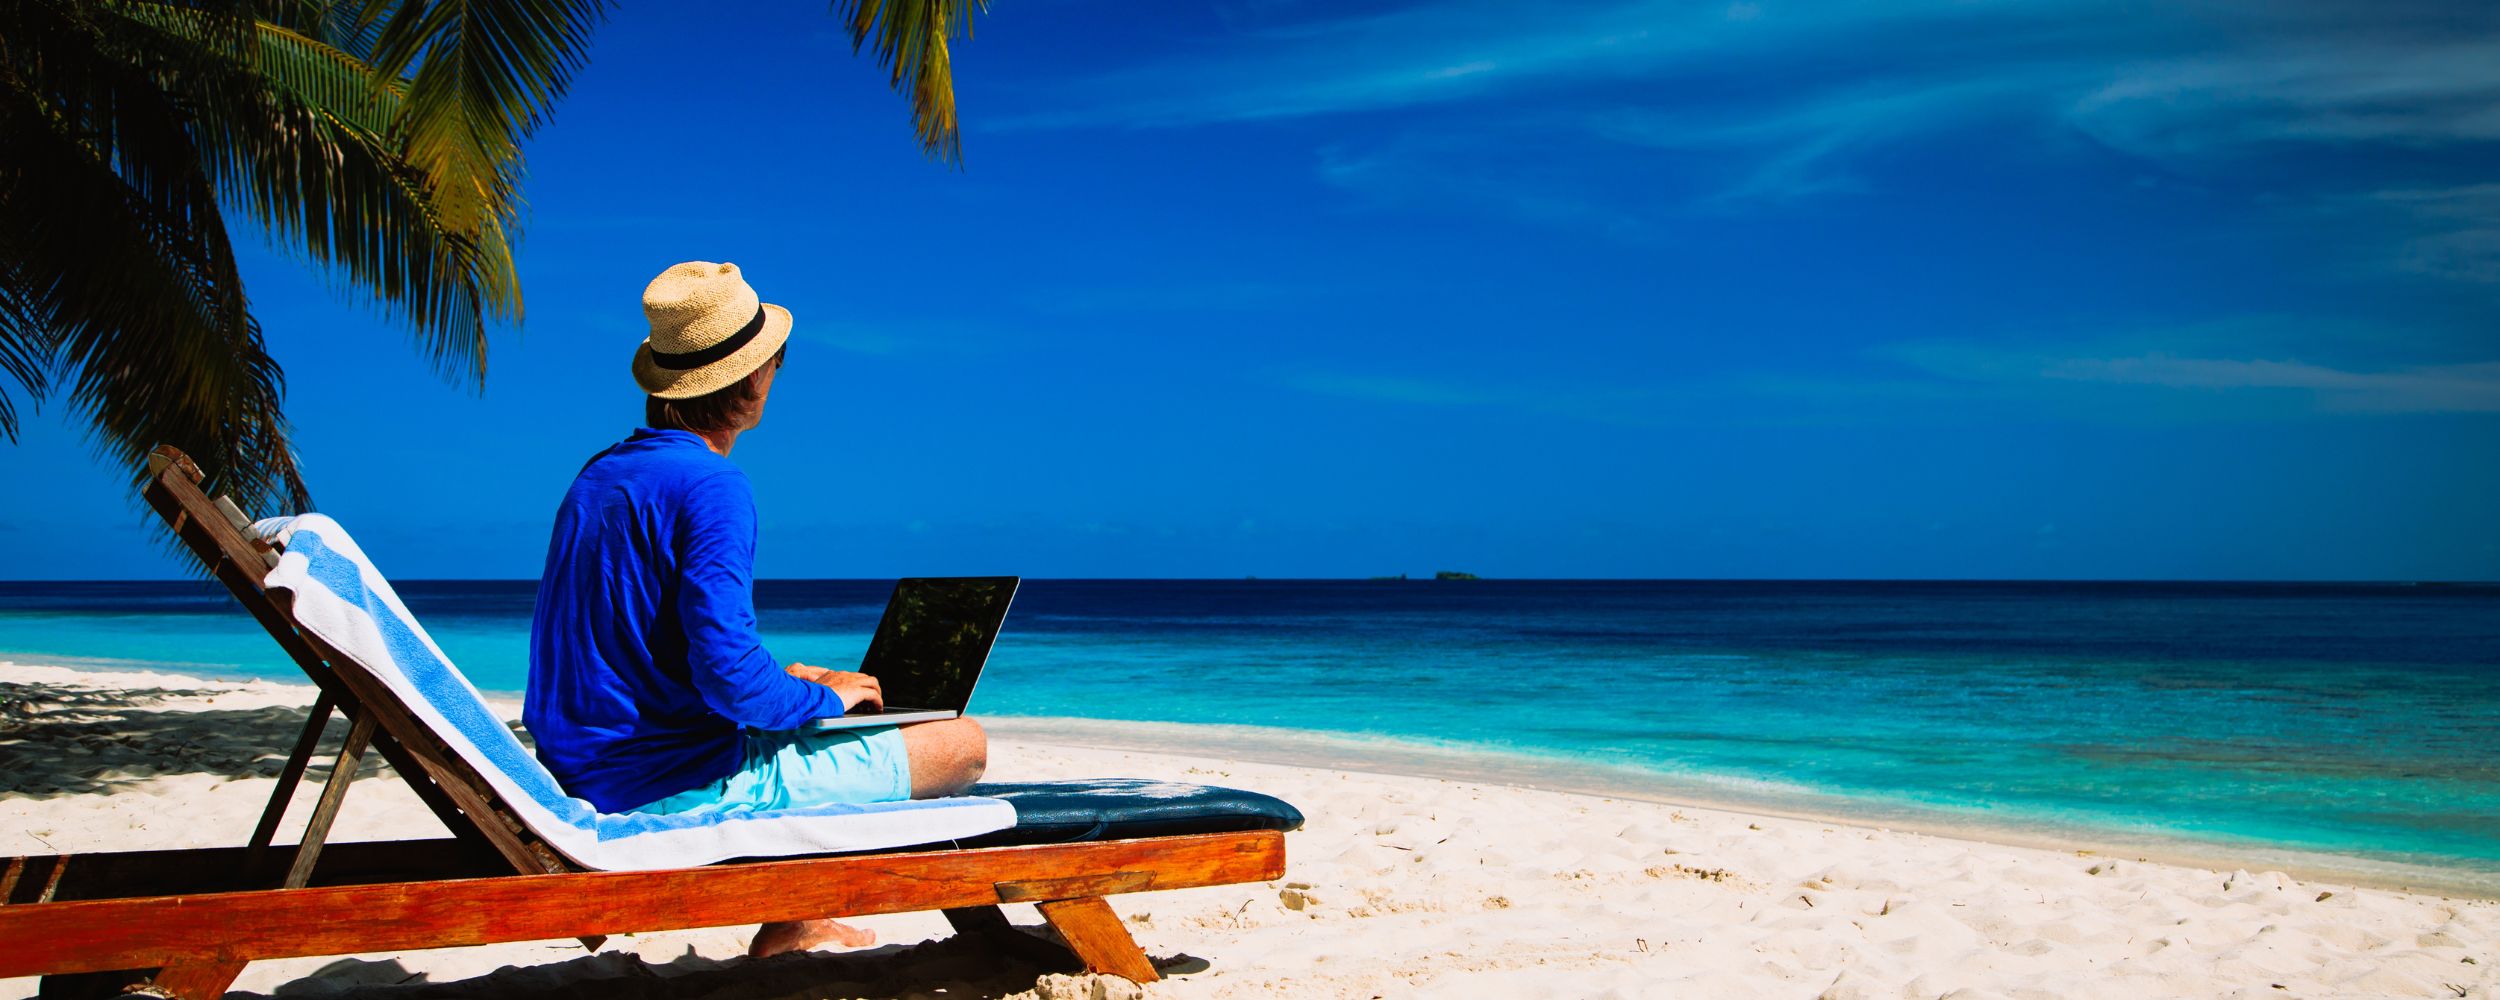 Countries Embracing Digital Nomads: Visa Opportunities for Remote Workers